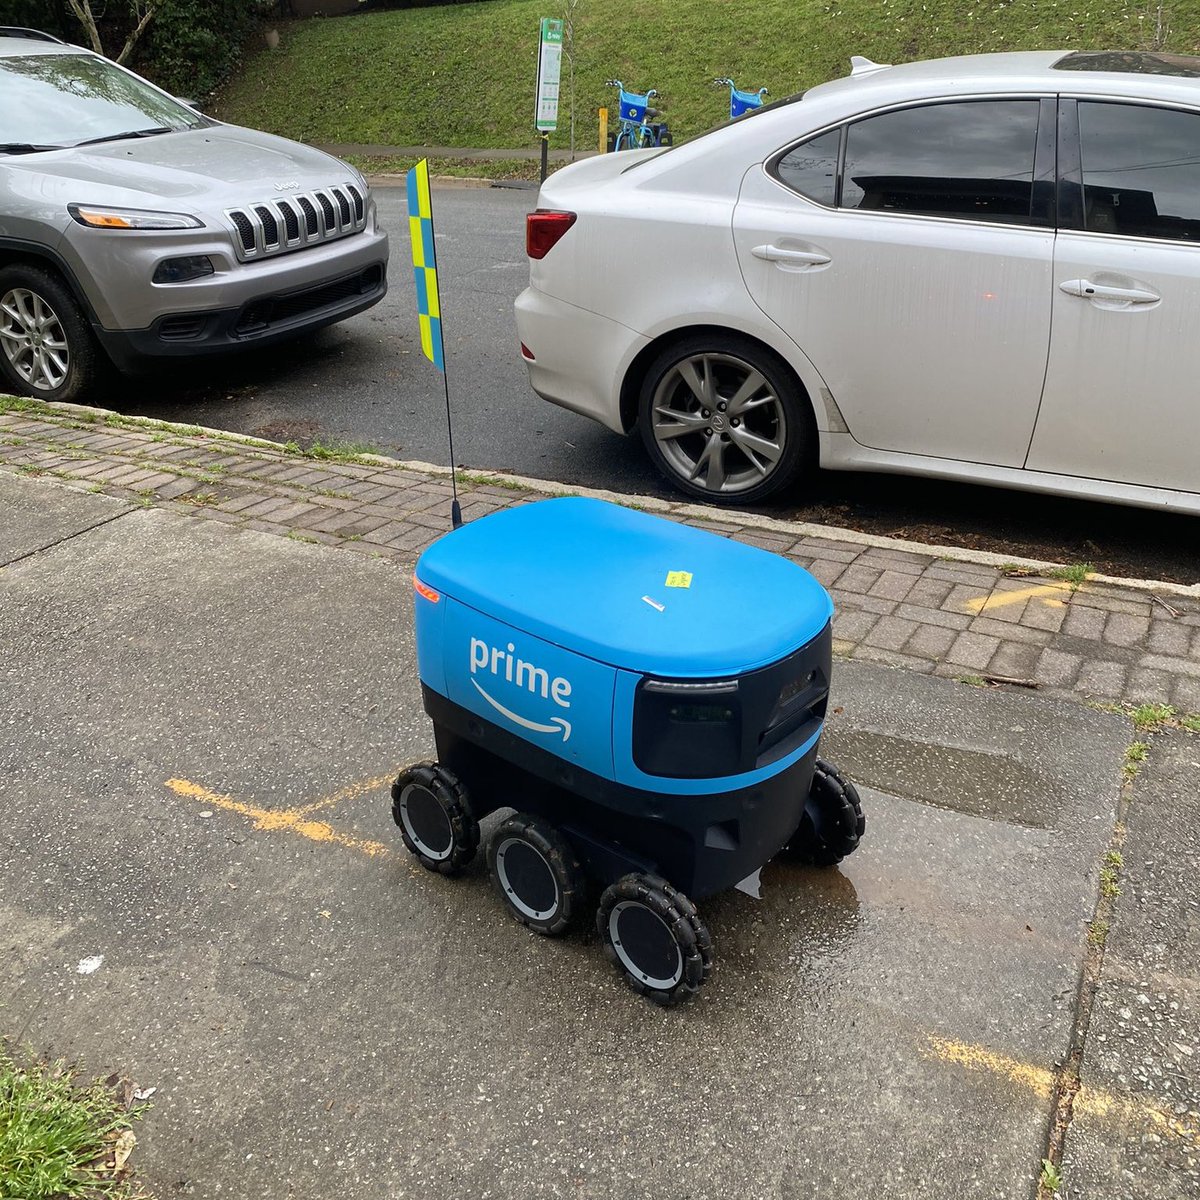 Ryan Duffy Amazon Scout Sighting In The Wild Yesterday C O A Friend Ohyesishan In Midtown Atl The Electric Sidewalk Delivery Bots Are Being Beta Tested In Snohomish County